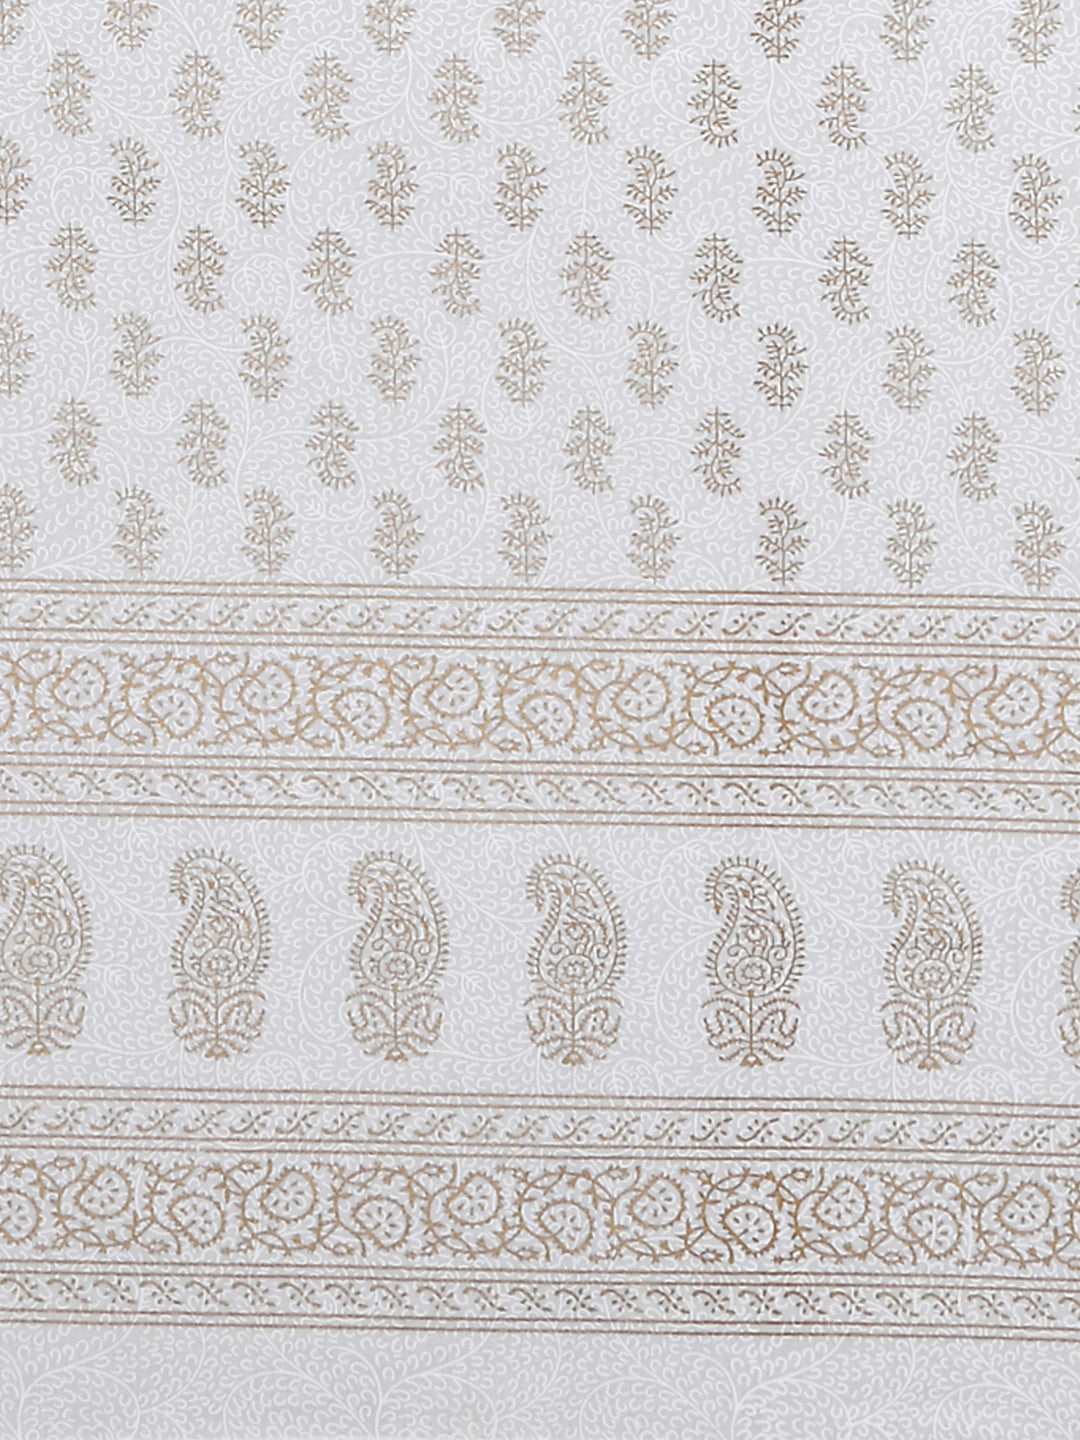 100% Cotton Table Cover; Golden Print On White Base